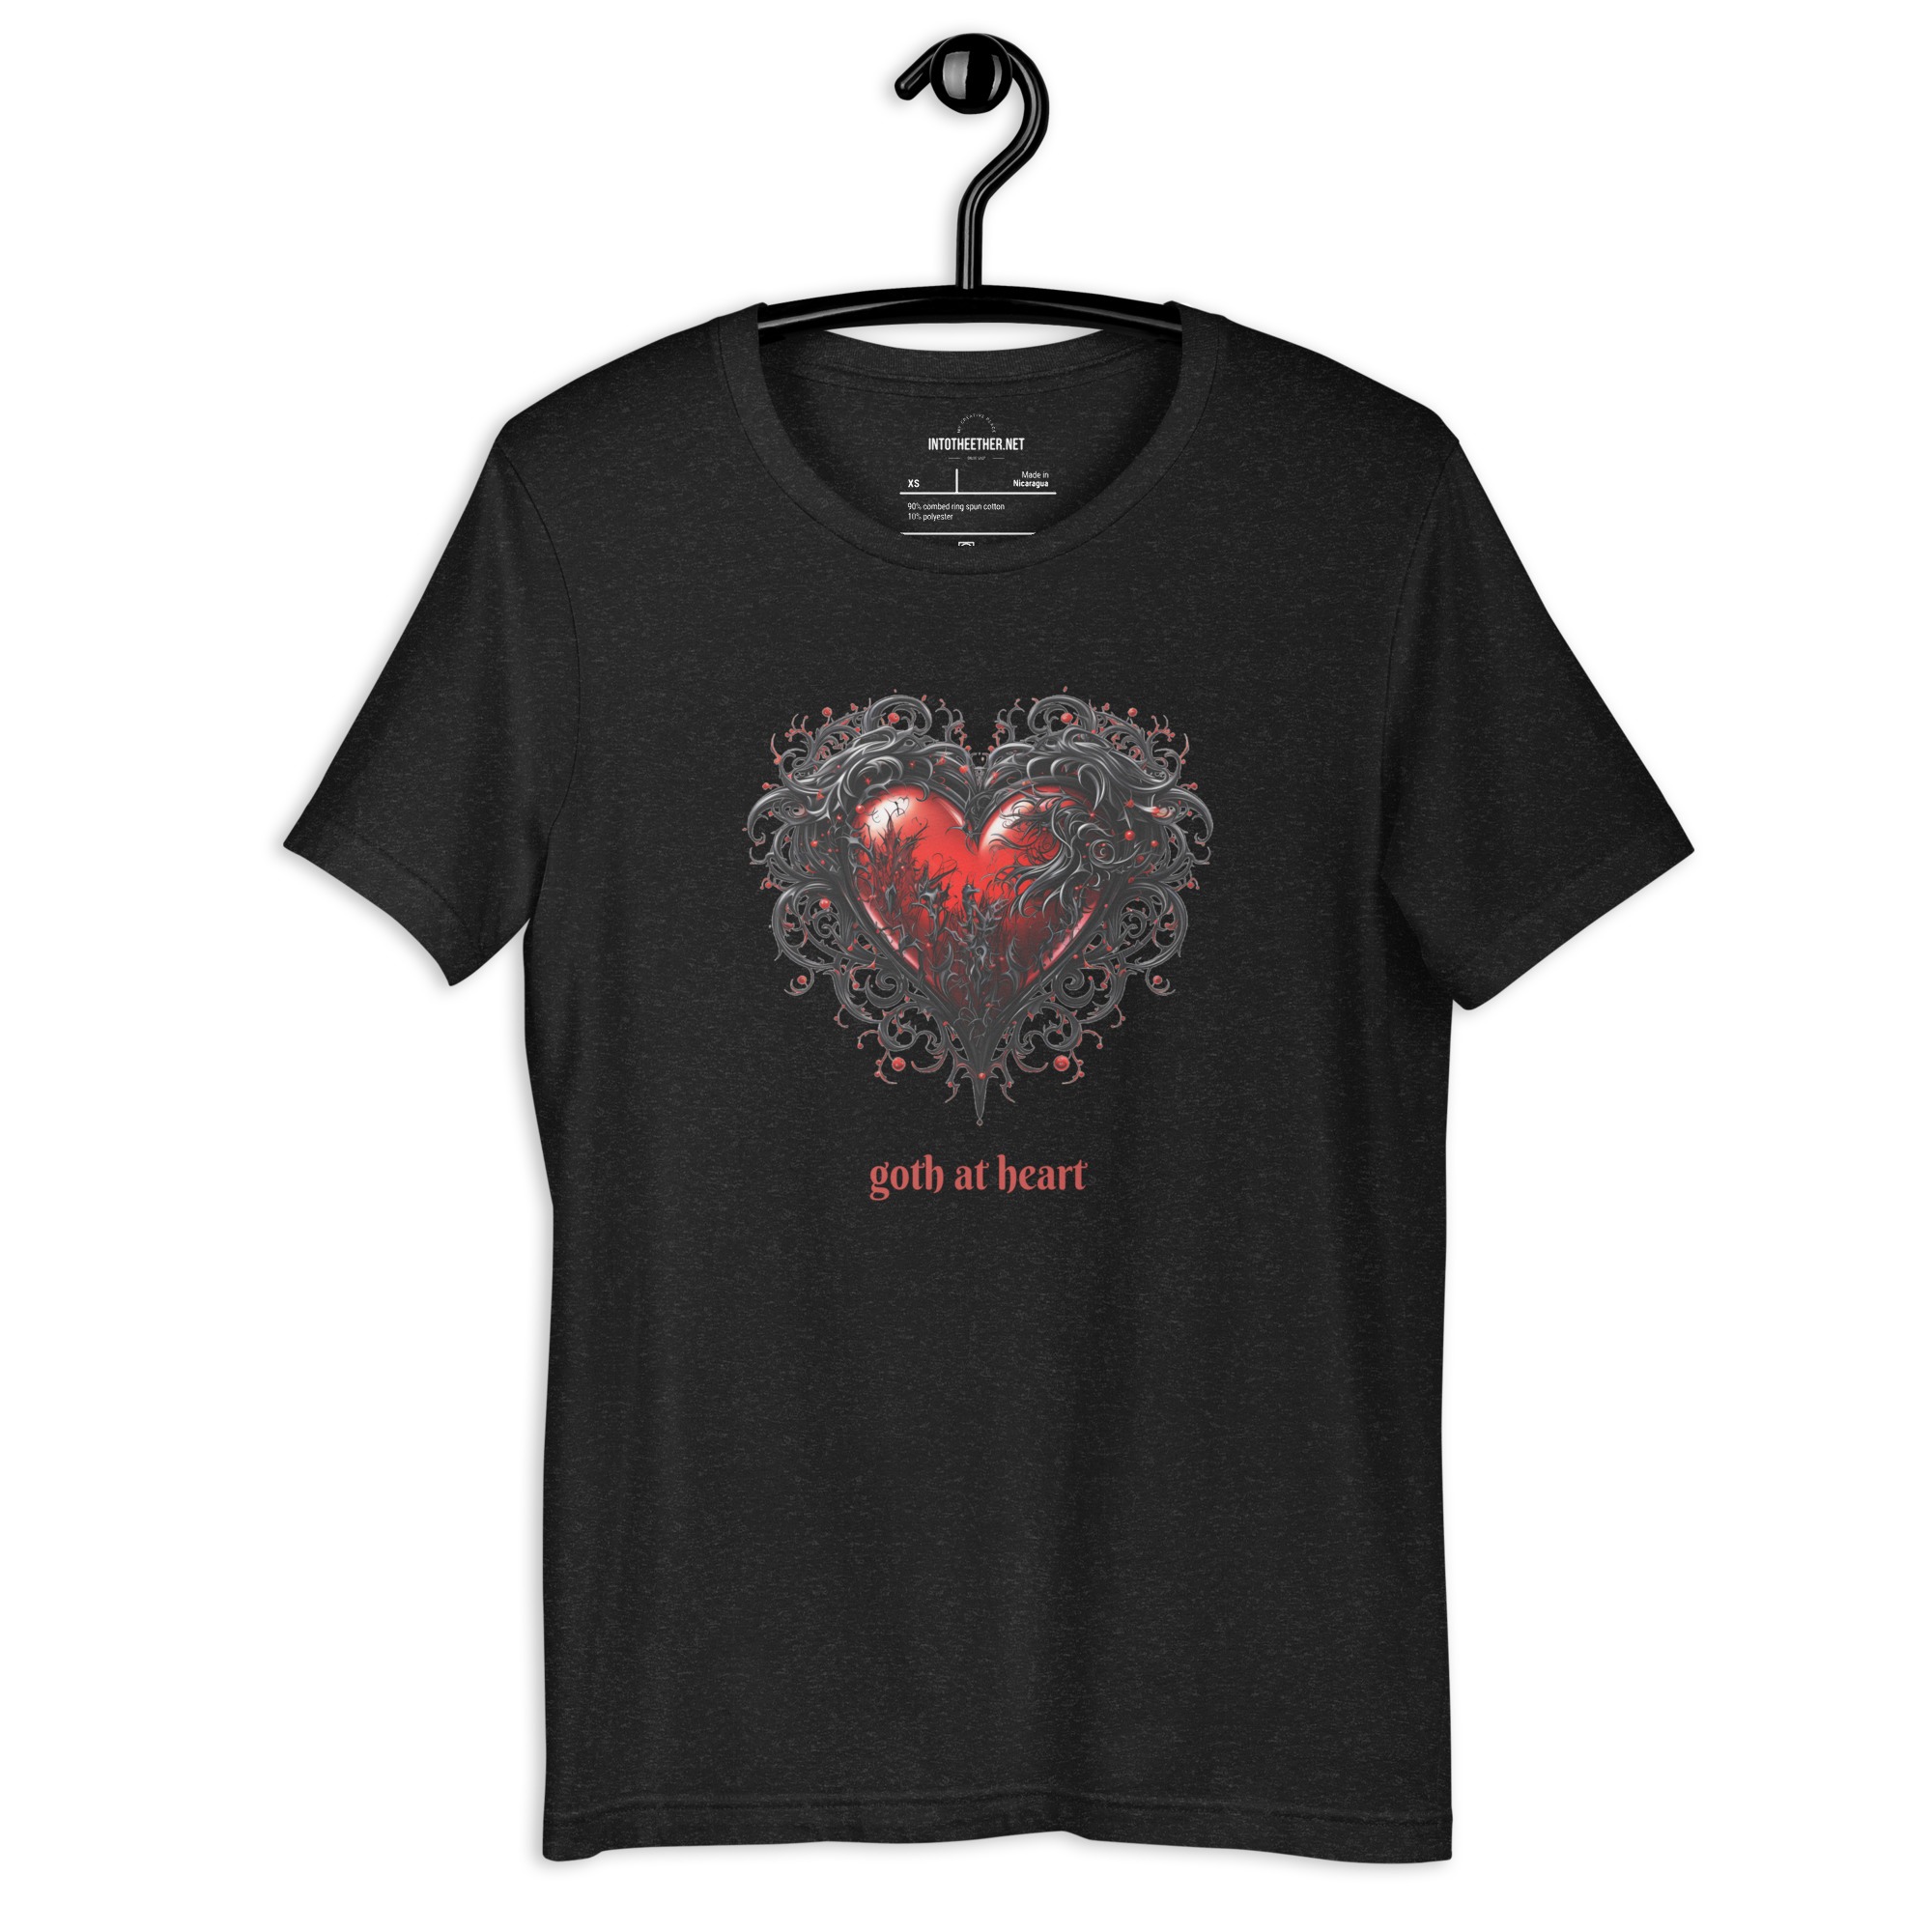 Goth at heart | gifts for goths | Unisex t-shirt